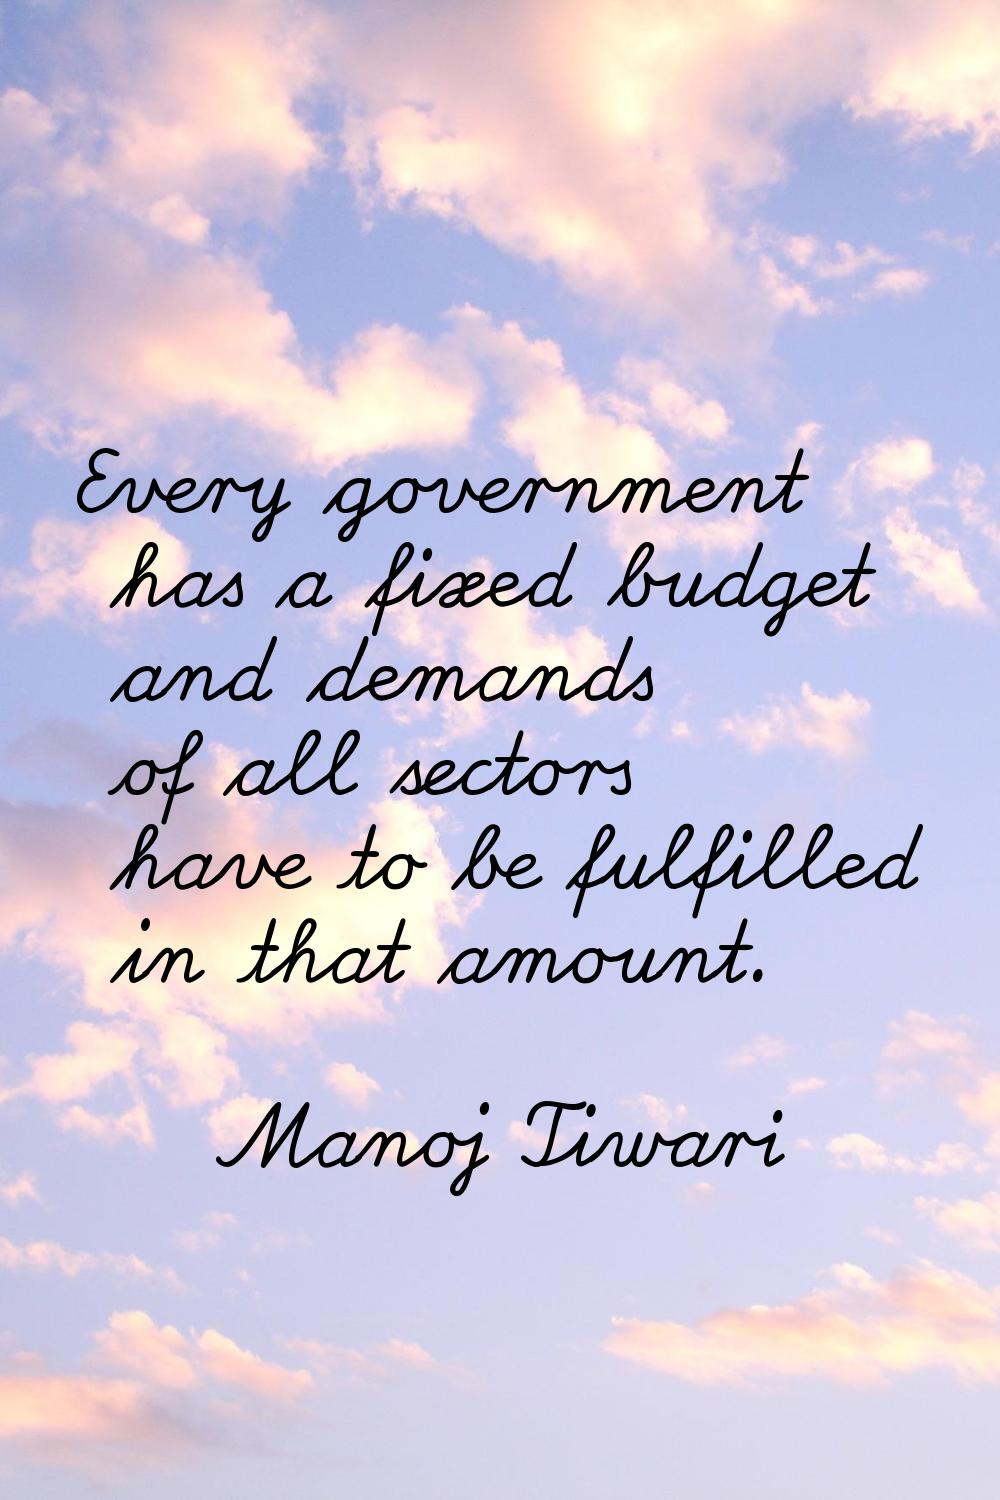 Every government has a fixed budget and demands of all sectors have to be fulfilled in that amount.